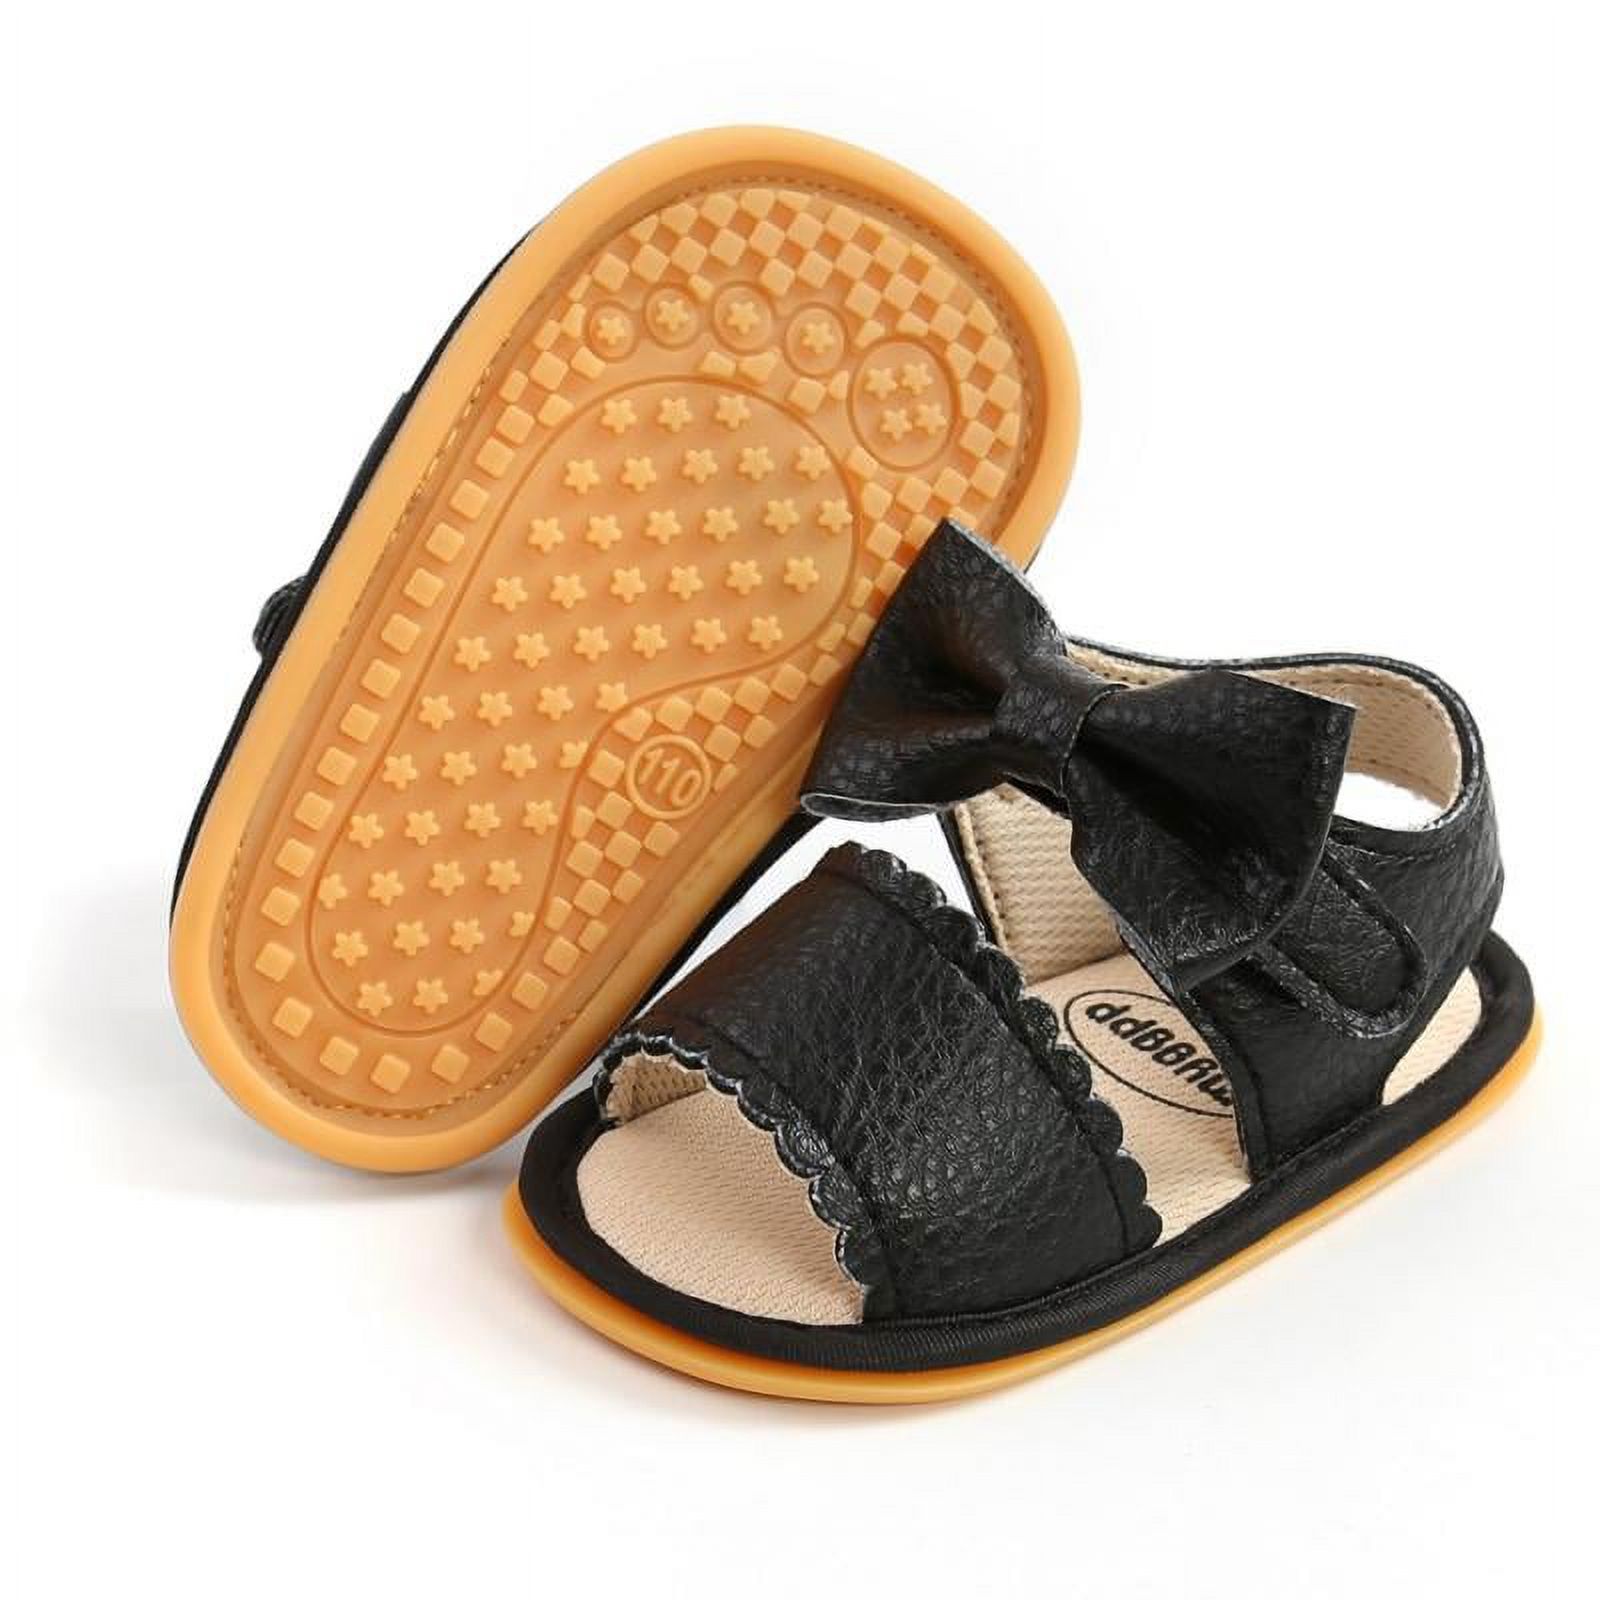 Infant Baby Girl Boy Casual Sandals Premium Princess Flats Summer Outdoor Beach Athletic Shoes Breathable Soft Anti Slip Rubber Sole Newborn Toddler Prewalker First Walking Shoes - image 3 of 6